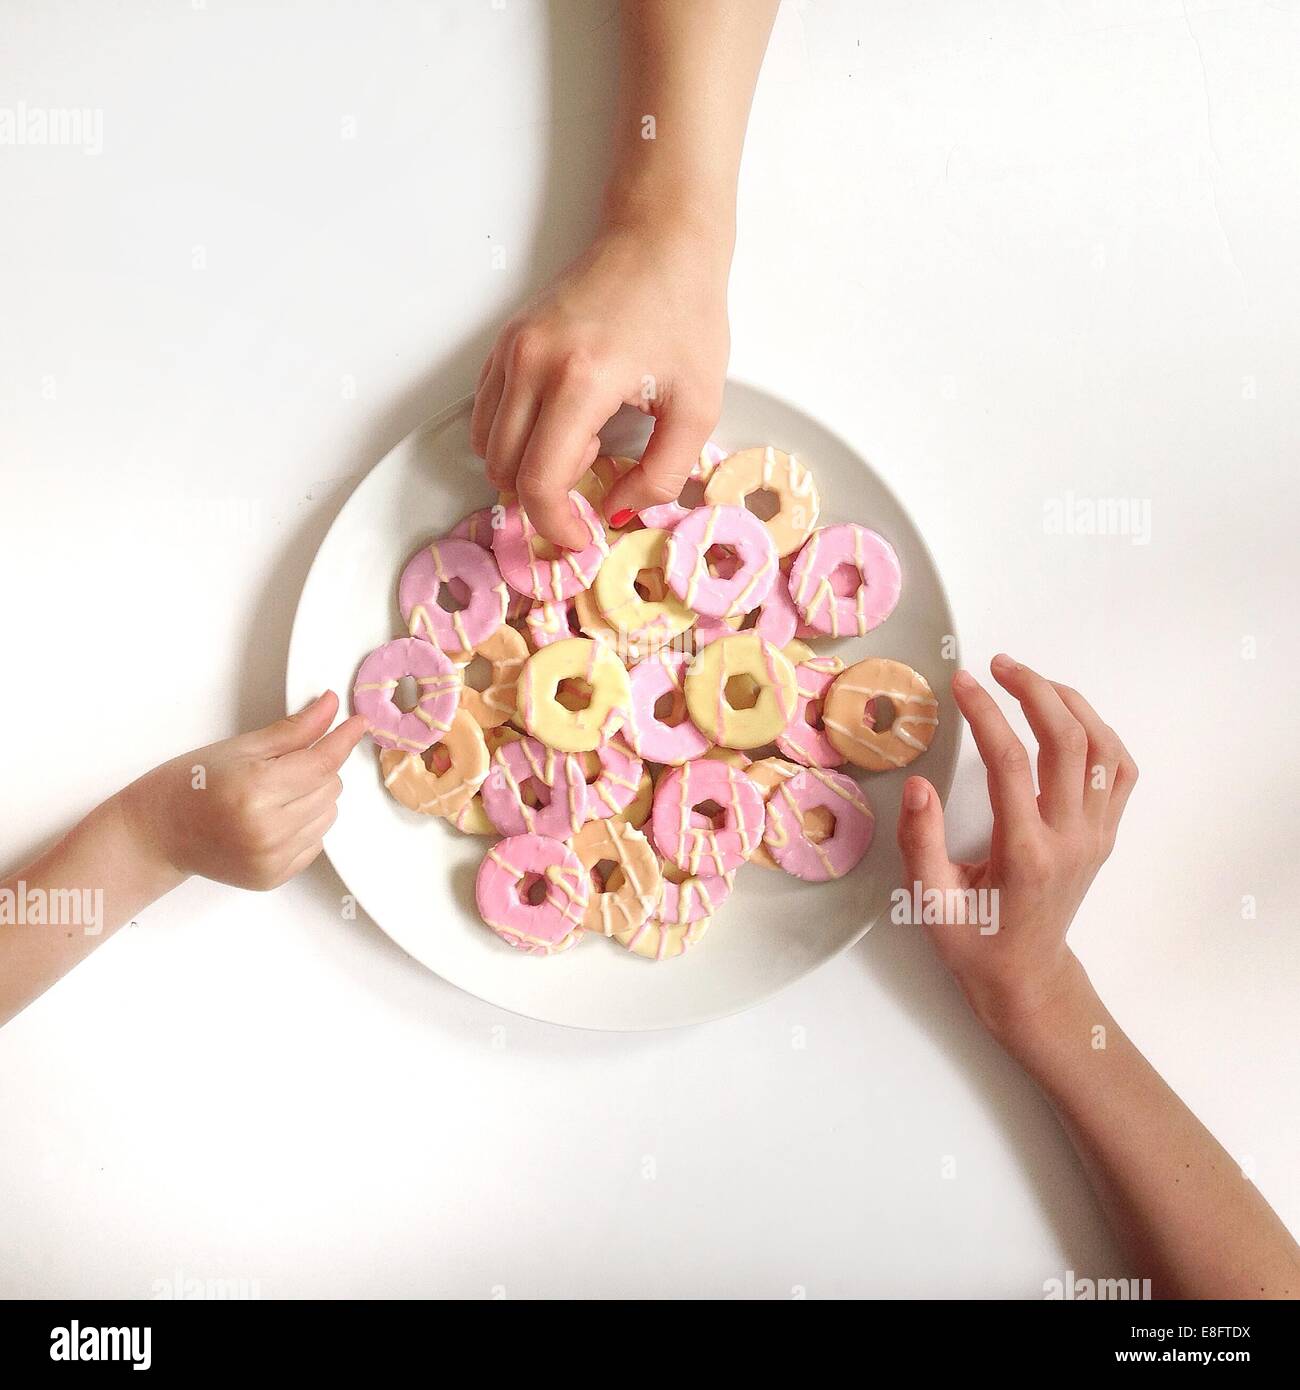 Girl's hands reaching for biscuits from plate Stock Photo